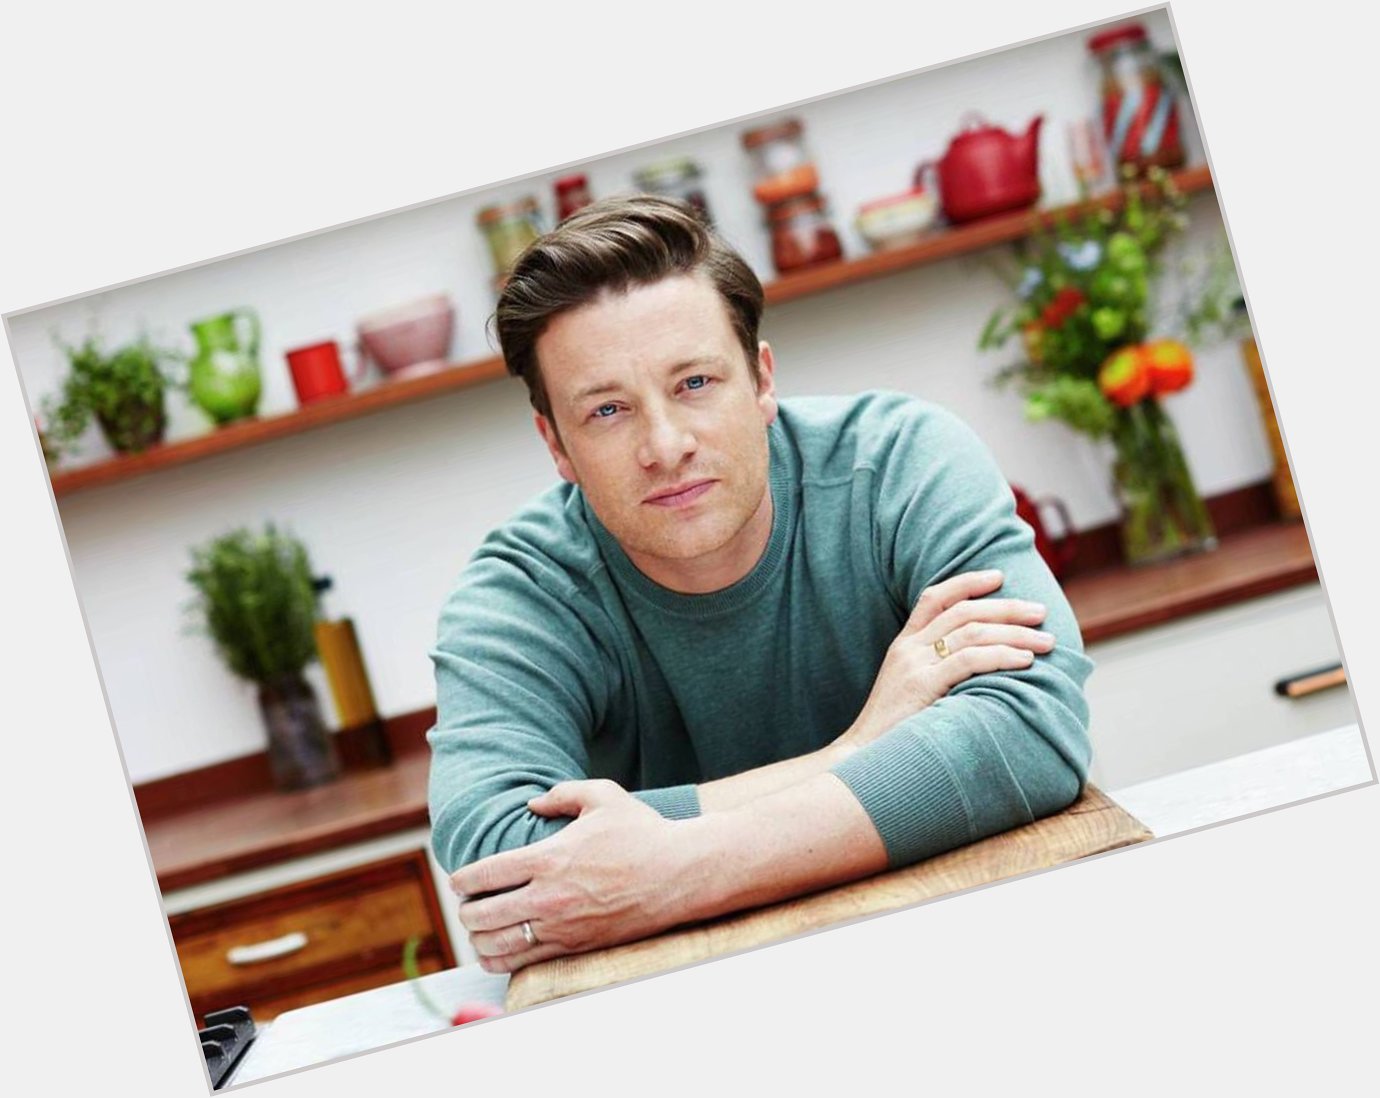 Happy Birthday to Jamie Oliver    About:  